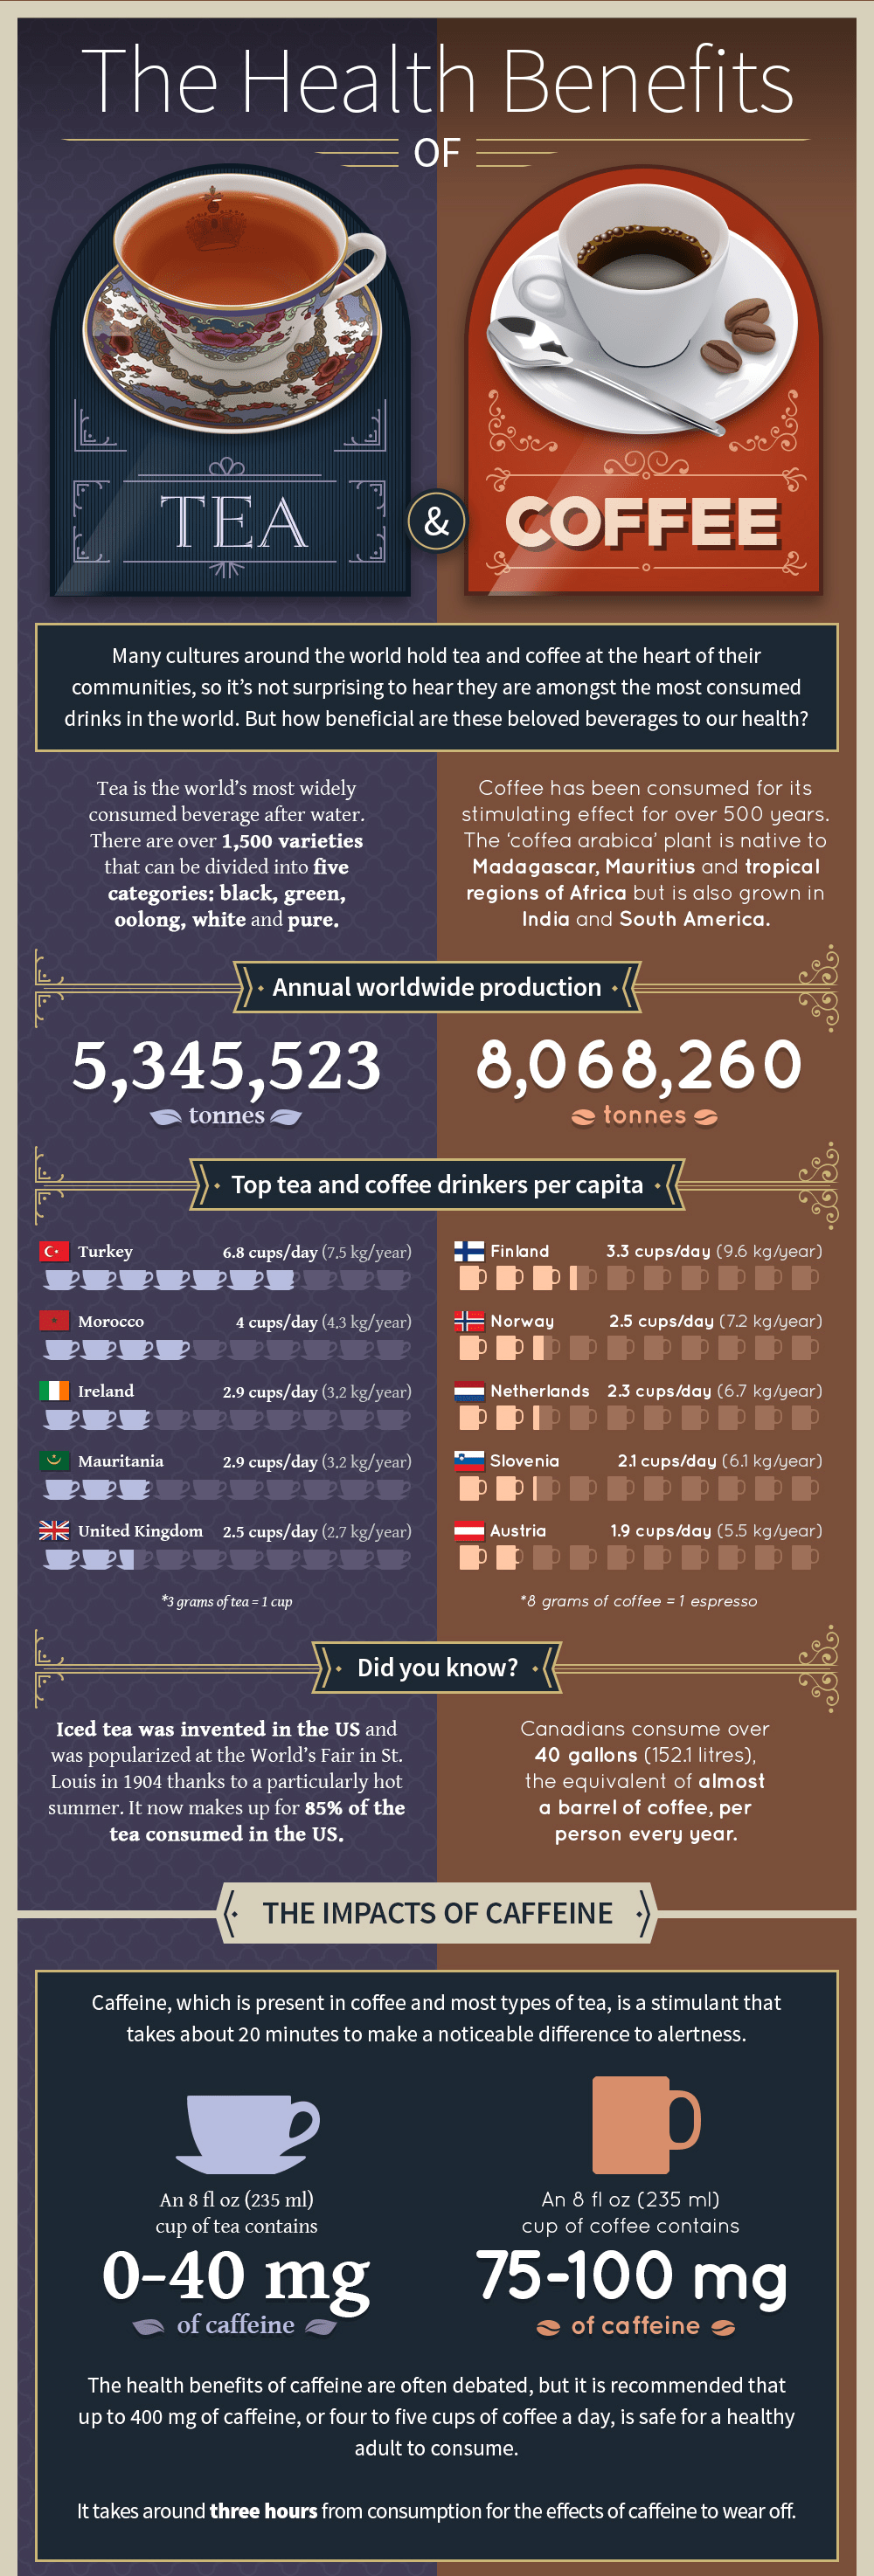 What You Don’t Know About Tea and Coffee - Infographic